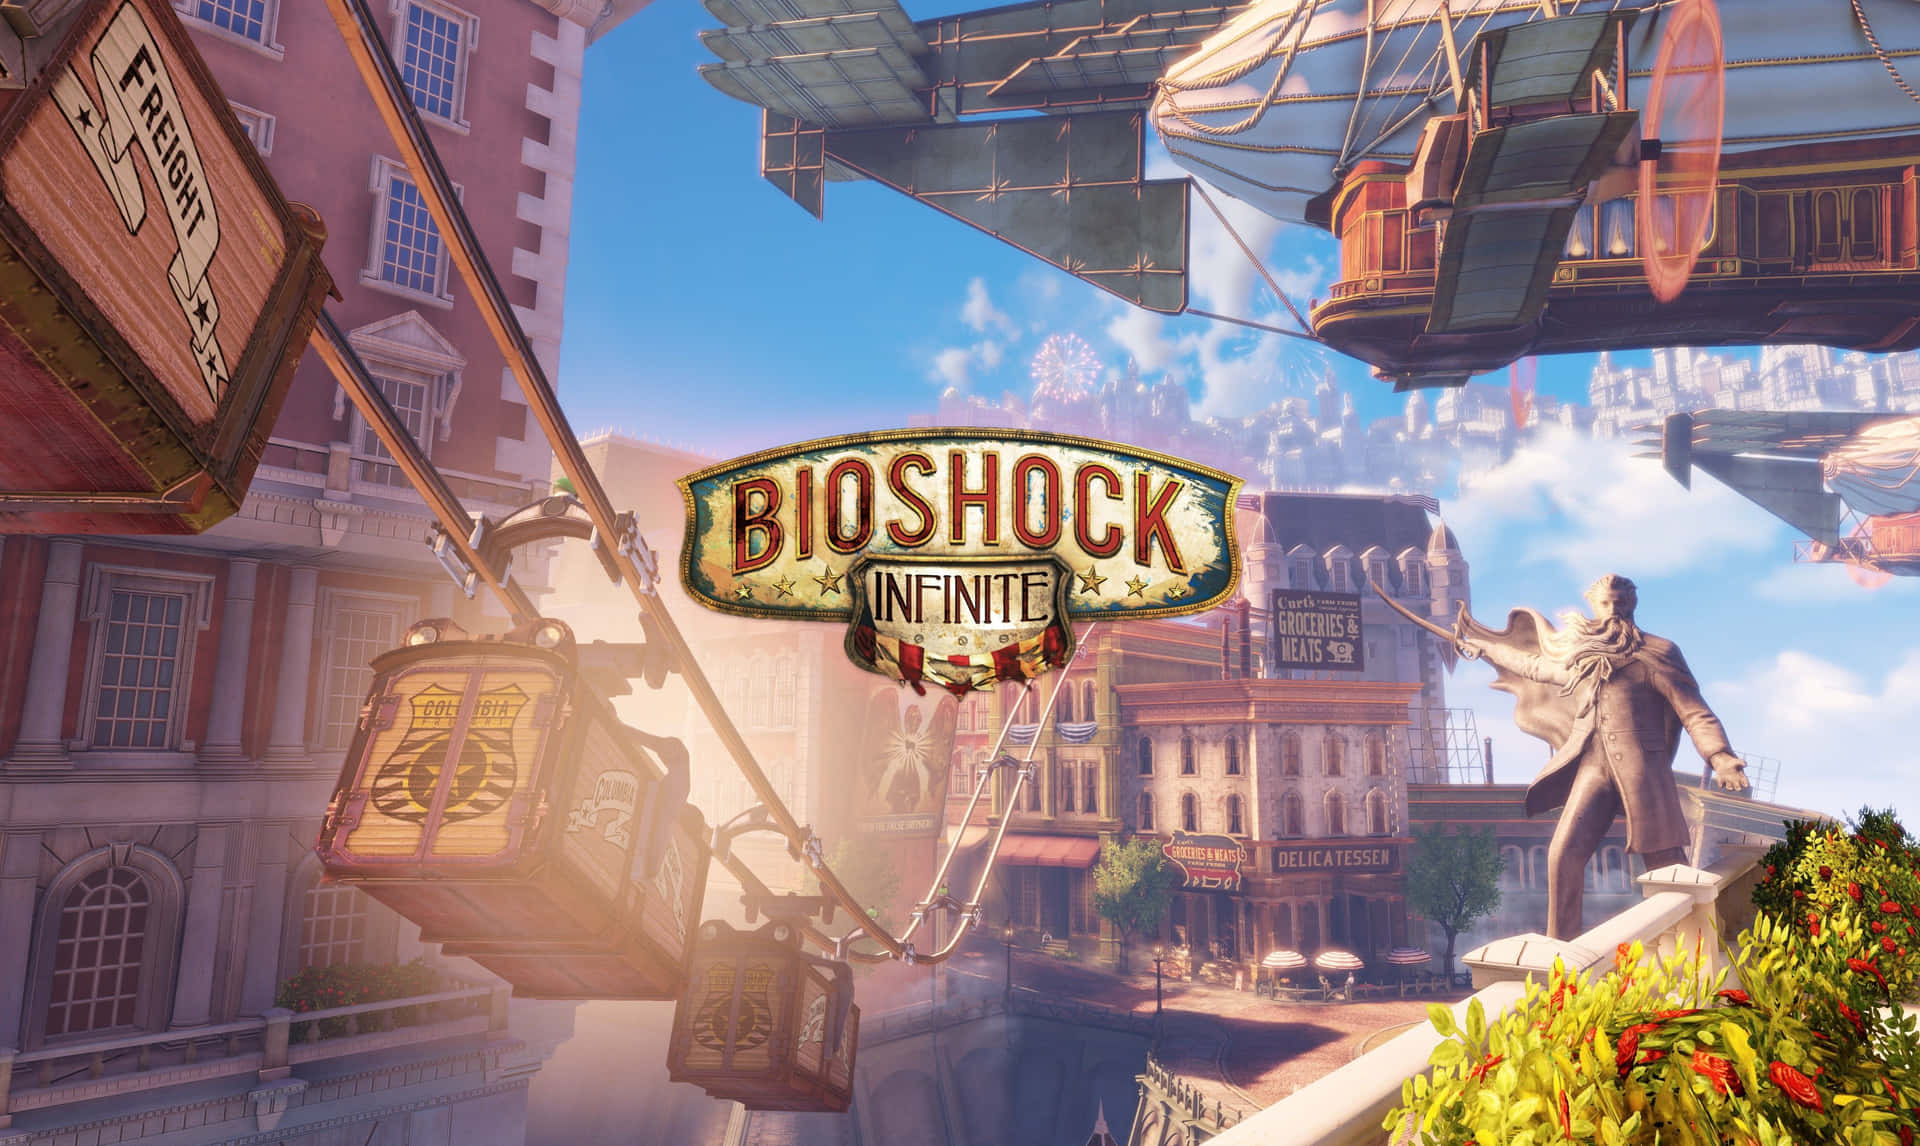 Step into the world of Bioshock Infinite and explore the stunning beauty of Columbia.